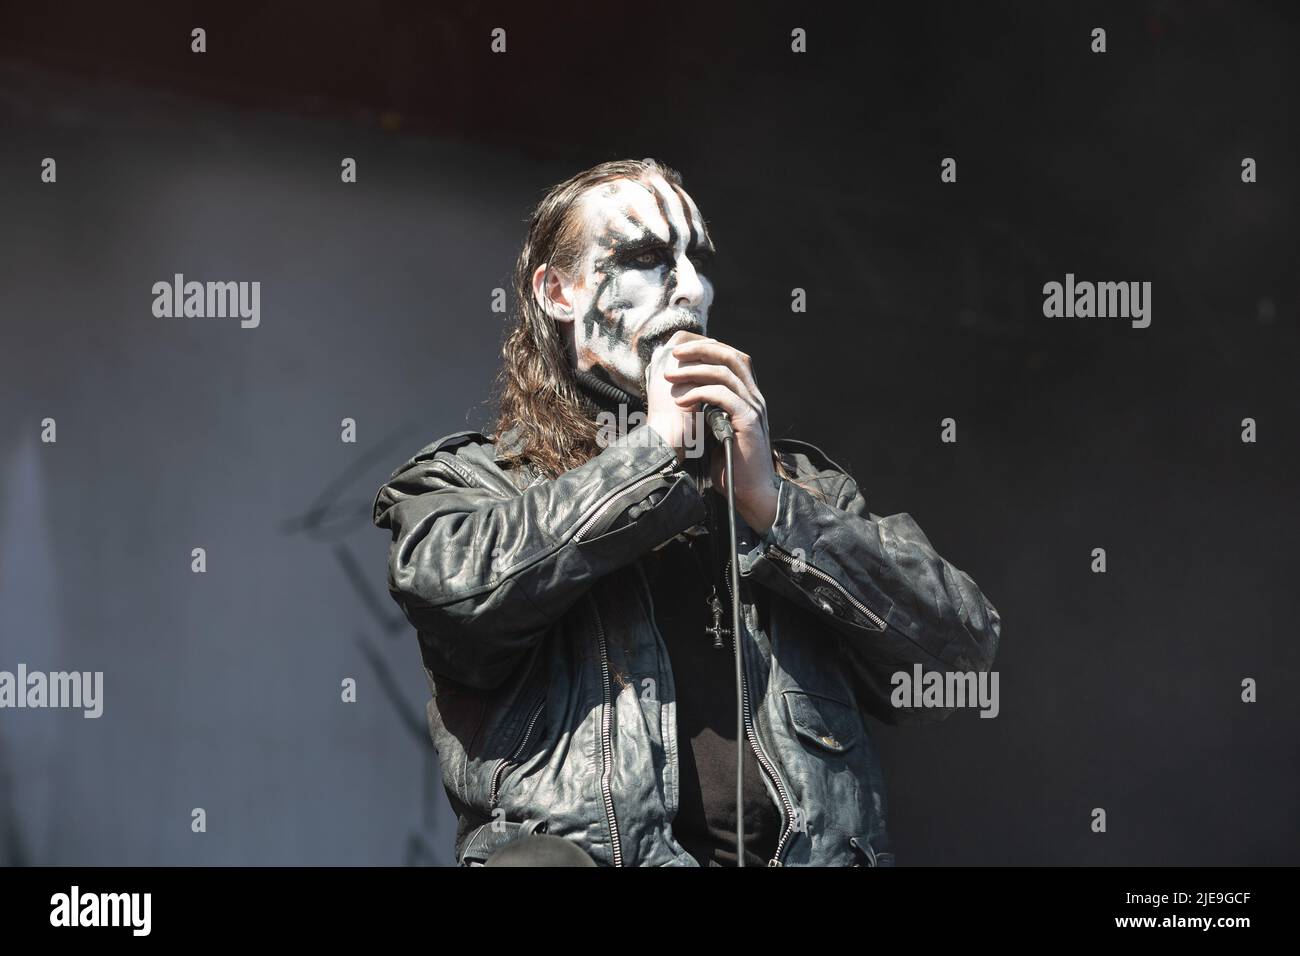 Oslo, Norway. 24th, June 2022. The Norwegian black metal band Gaahls Wyrd performs a live concert during the Norwegian music festival Tons of Rock 2022 in Oslo. Here vocalist Gaahl is seen live on stage. (Photo credit: Gonzales Photo - Per-Otto Oppi). Stock Photo